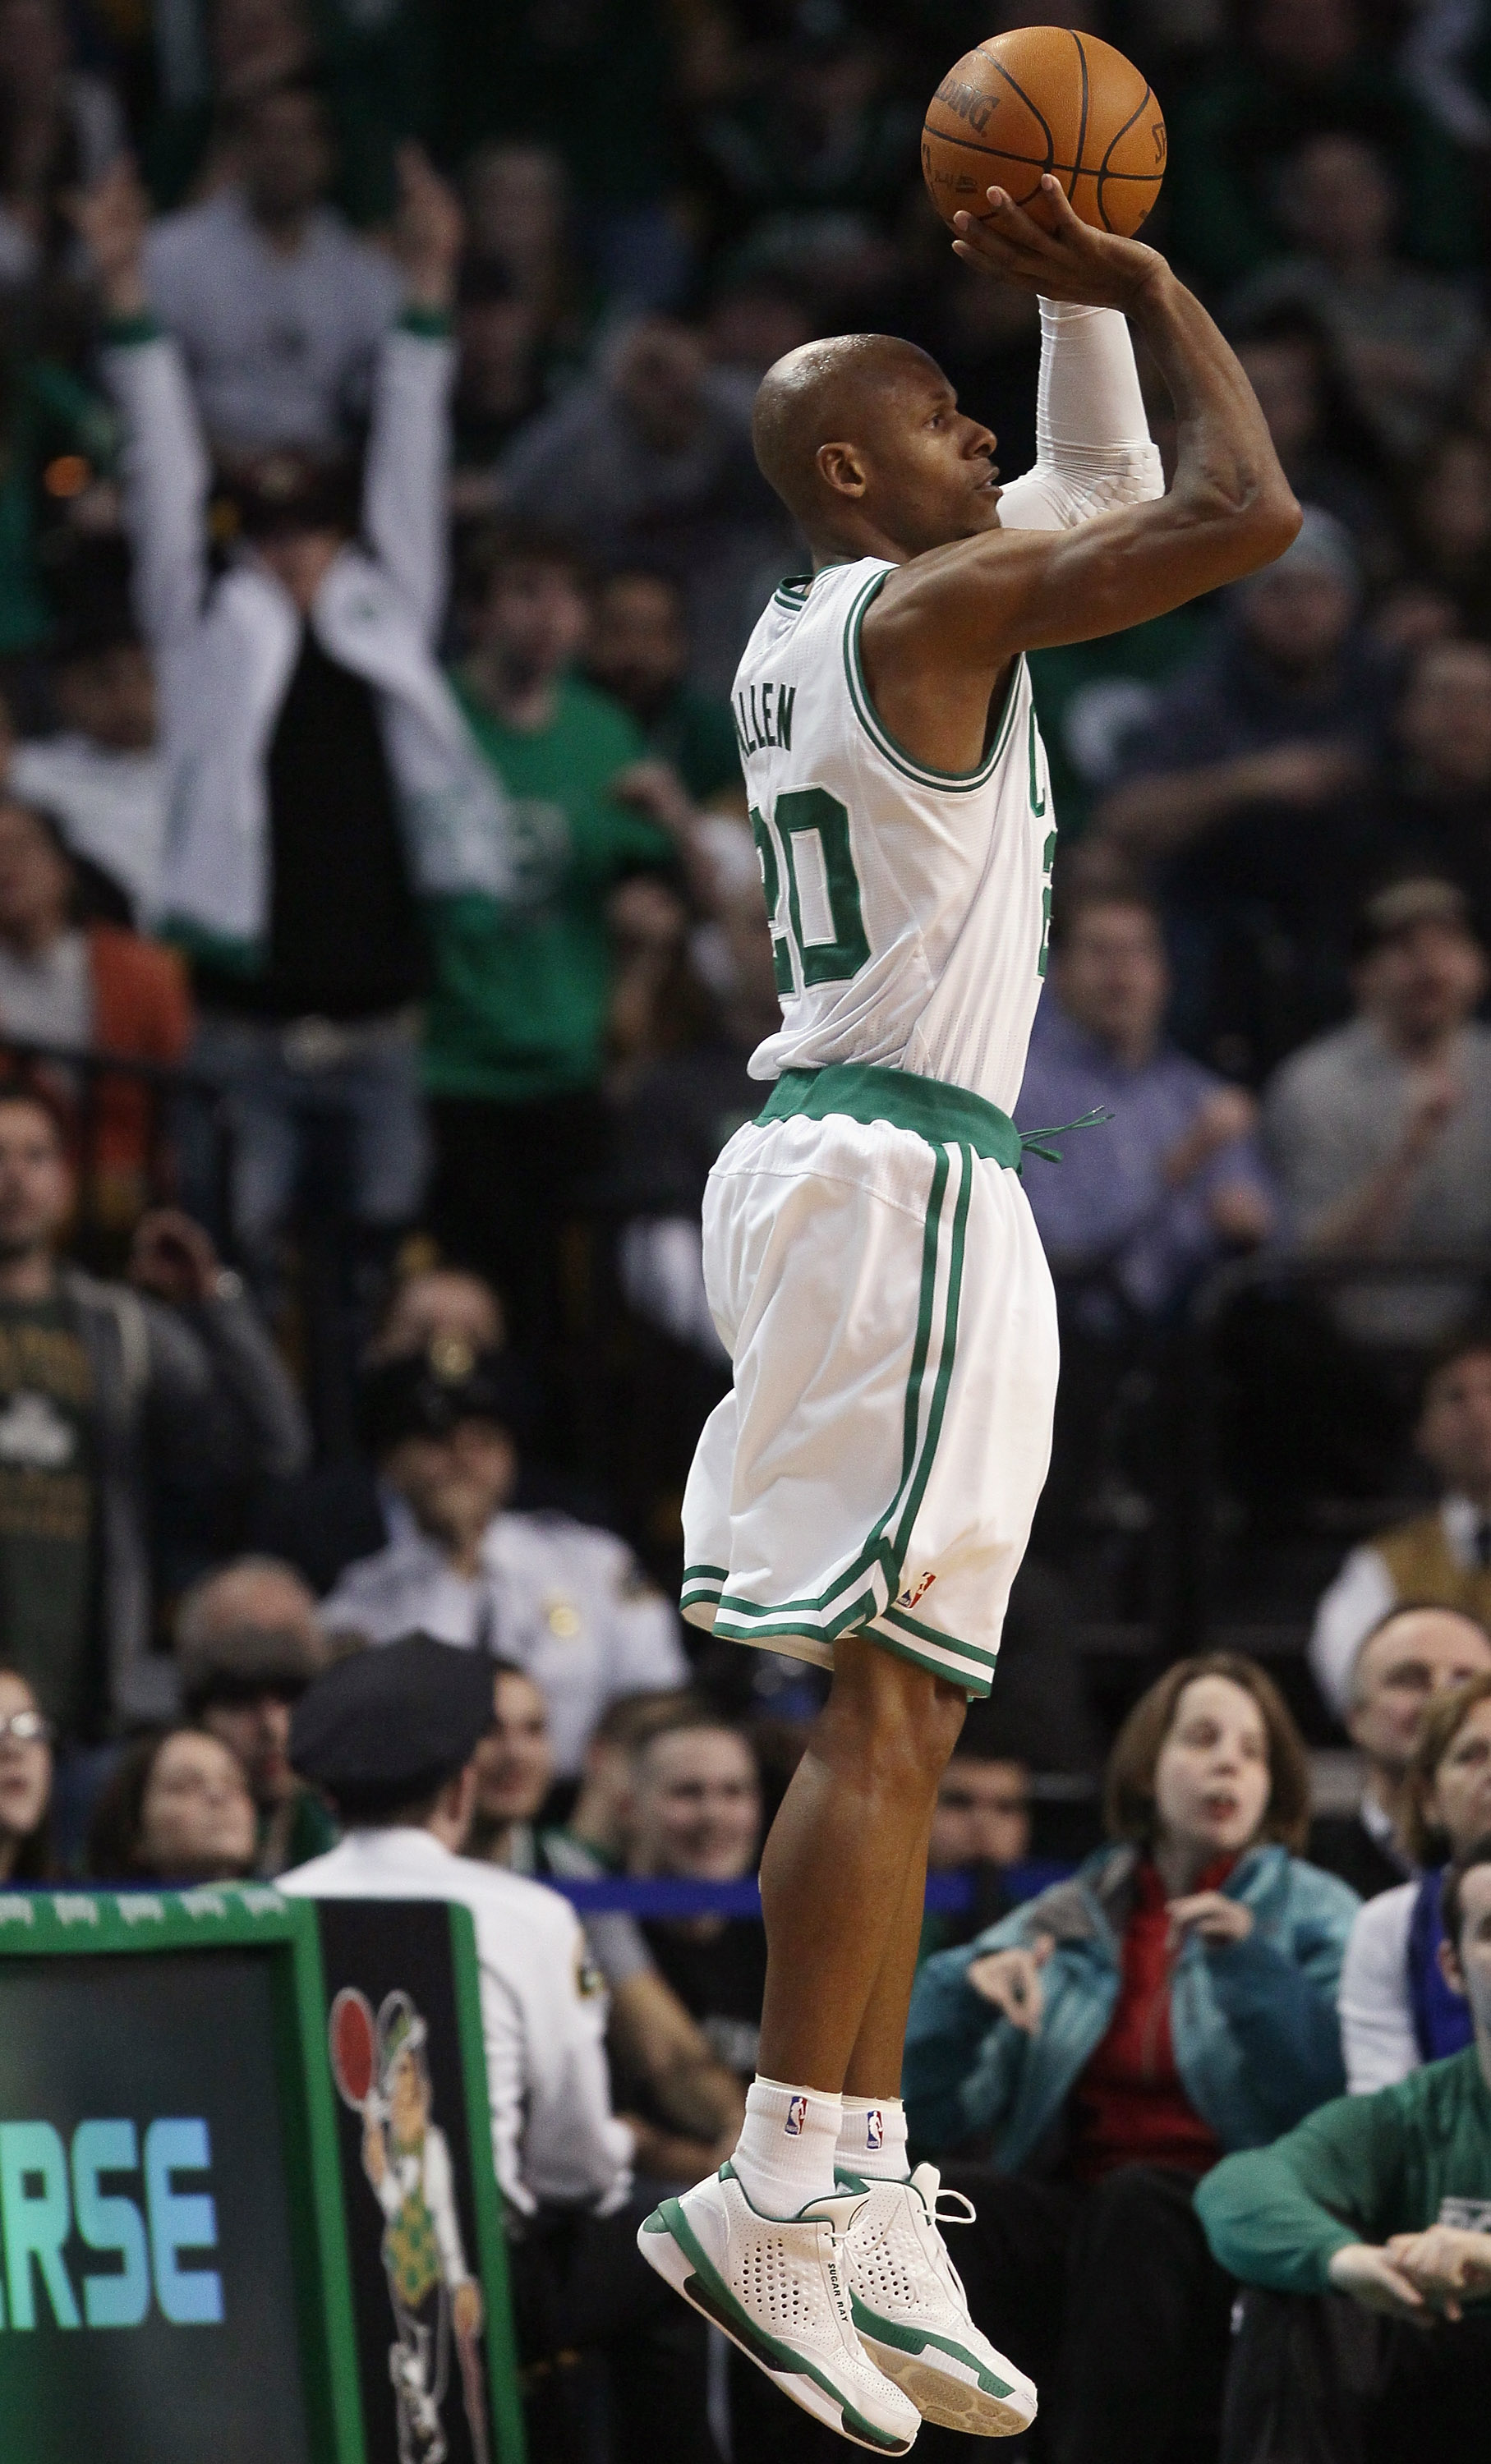 BOSTON, MA - JANUARY 03:  Ray Allen #20 of the Boston Celtics makes three point shot late in the fourth quarter against the Minnesota Timberwolves on January 3, 2011 at the TD Garden in Boston, Massachusetts. The Celtics defeated the Timberwolves 96-93. N